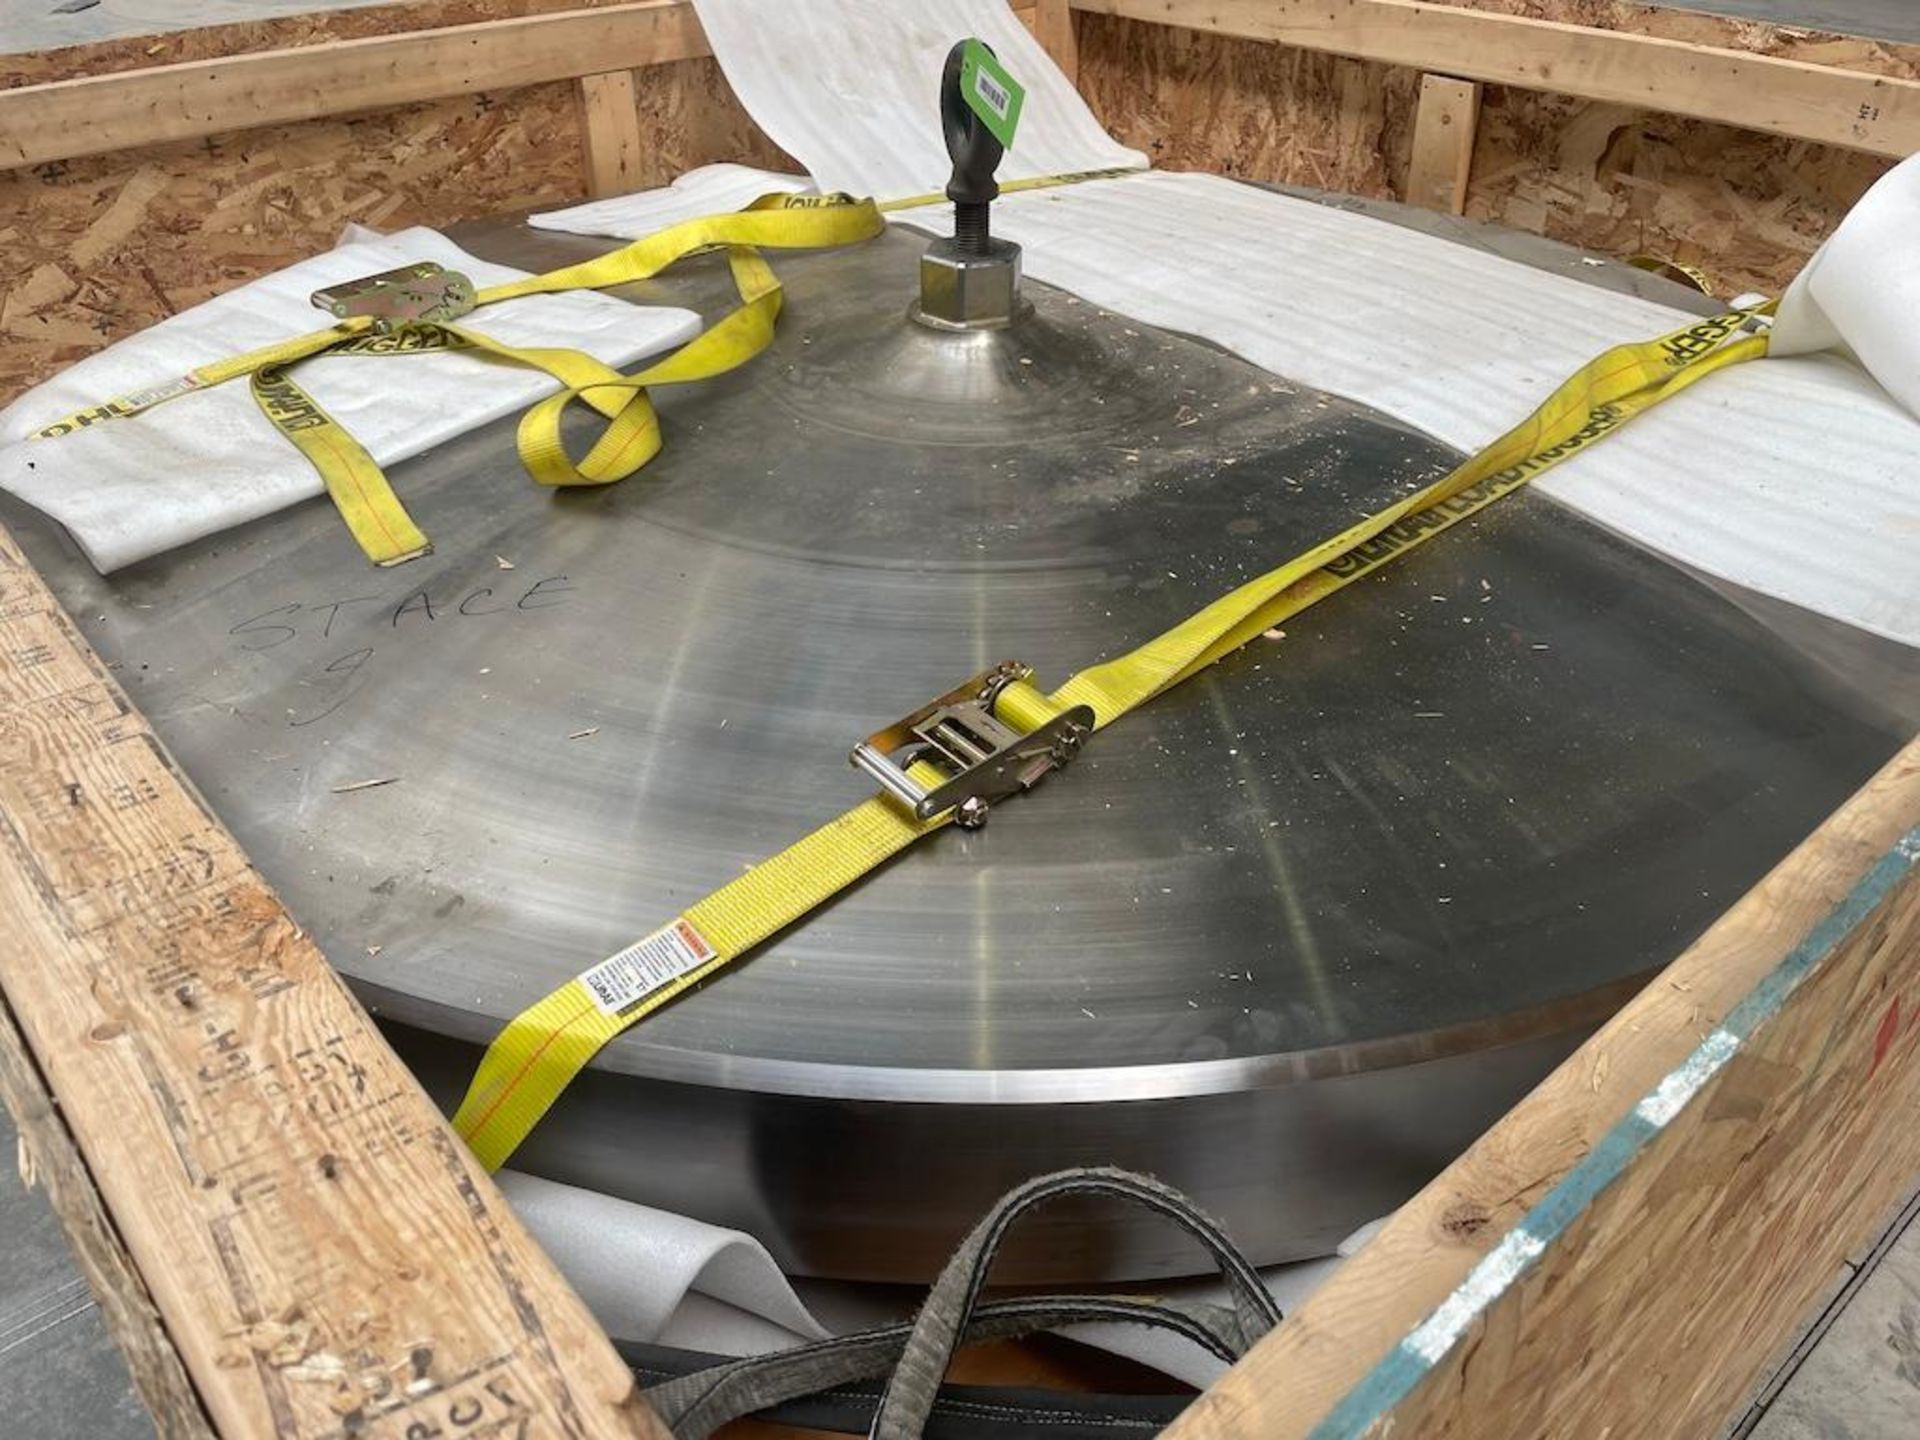 APPROX 7 FT DIAMETER X 8 INCH HIGH SOLID STEEL BLOCK IN CRATE, SAYS 13,450 LBS [MATANE] *PLEASE NOTE - Image 3 of 5